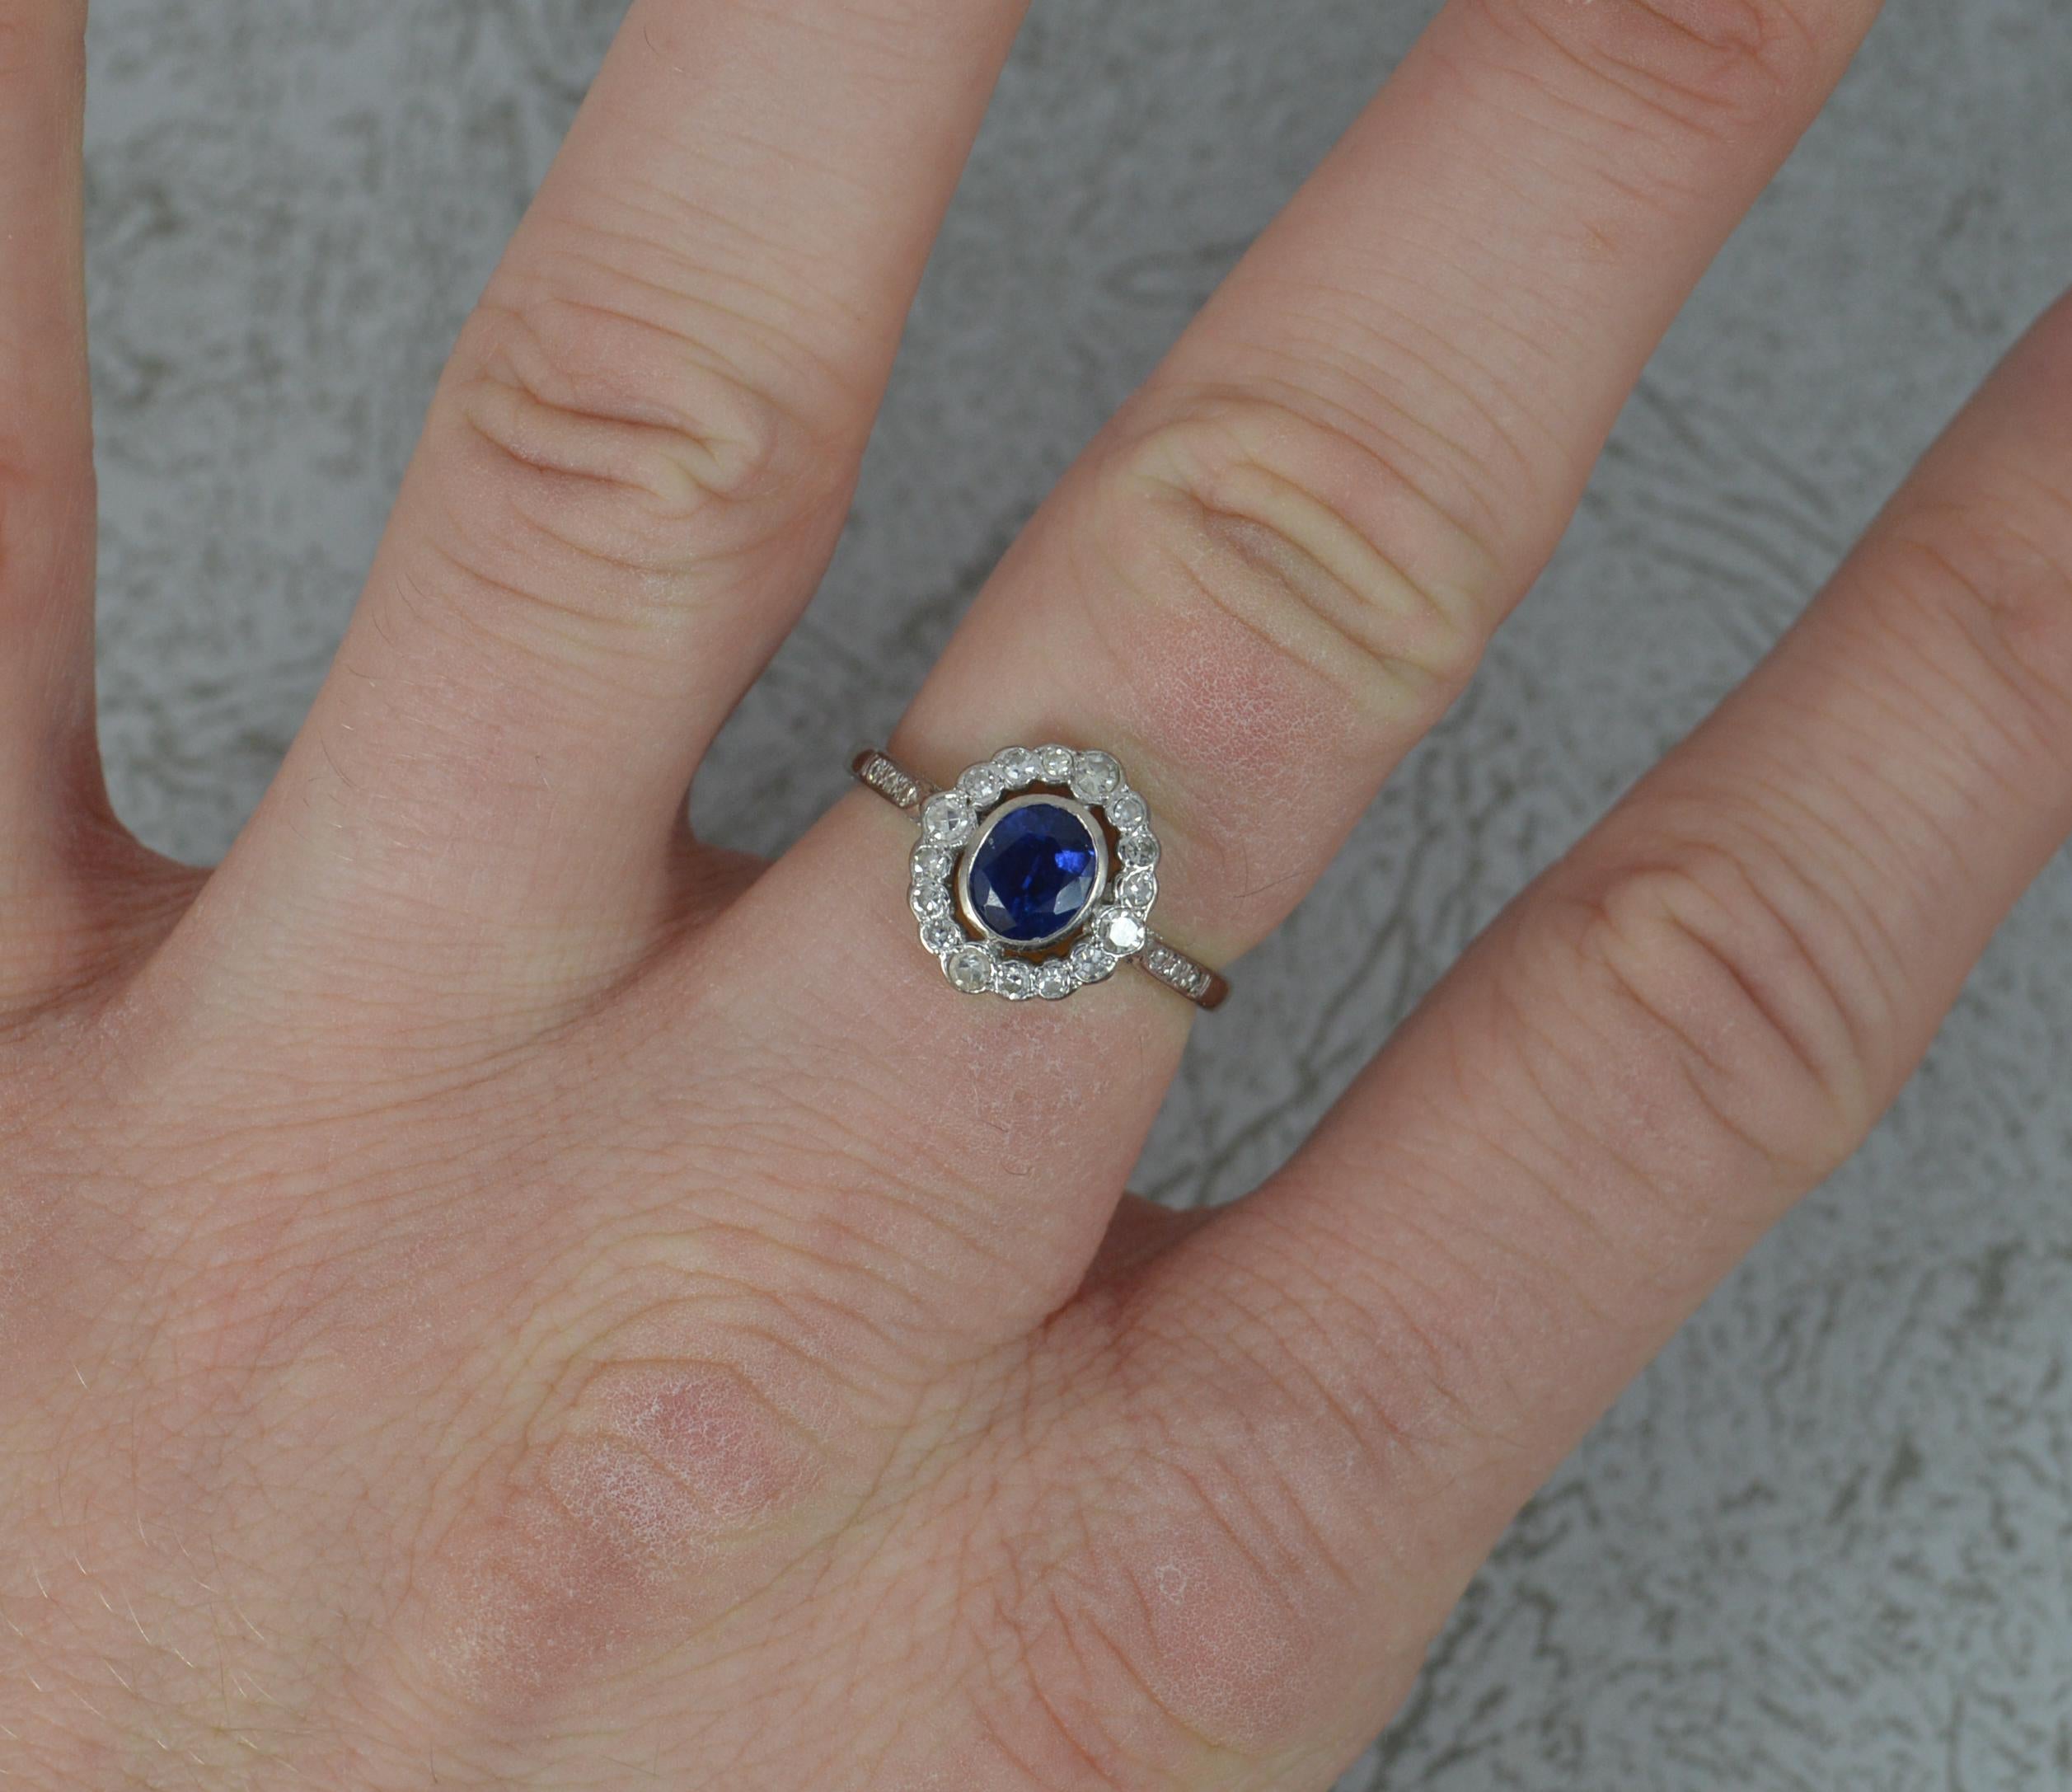 A beautiful Sapphire and Diamond ring.
Solid 18 carat white gold shank and head.
Designed with a 5.2mm x 6.3mm oval blue sapphire in collet setting to centre. Surrounding are 16 natural round brilliant cut diamonds all in bubble bezel settings.
To